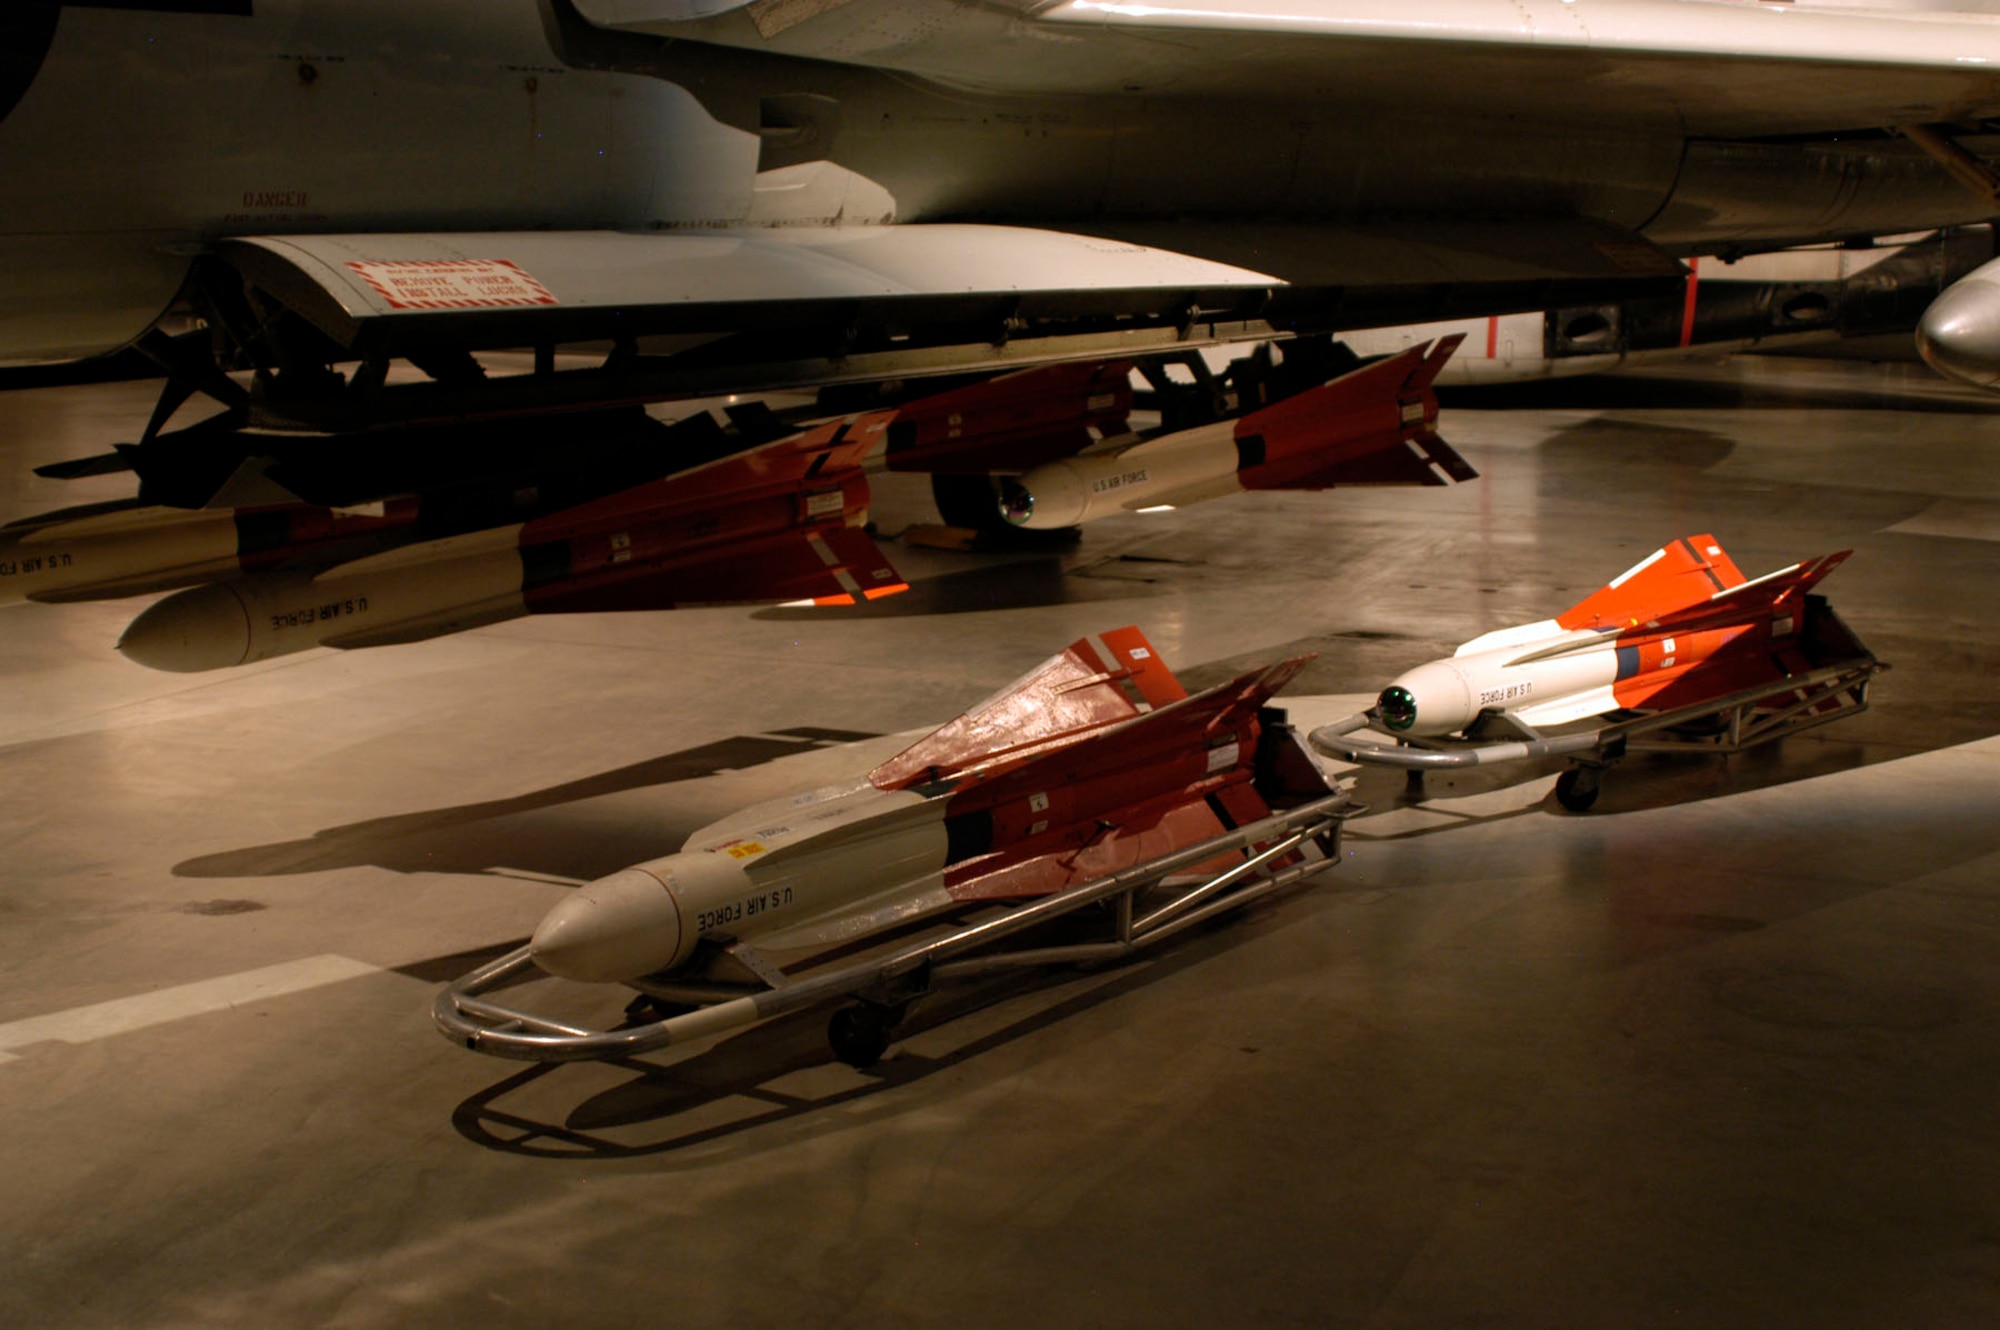 DAYTON, Ohio - AIM-4F Super Falcon air-to-air missileson display near the F-106 in the Cold War Gallery at the National Museum of the U.S. Air Force. (U.S. Air Force photo)